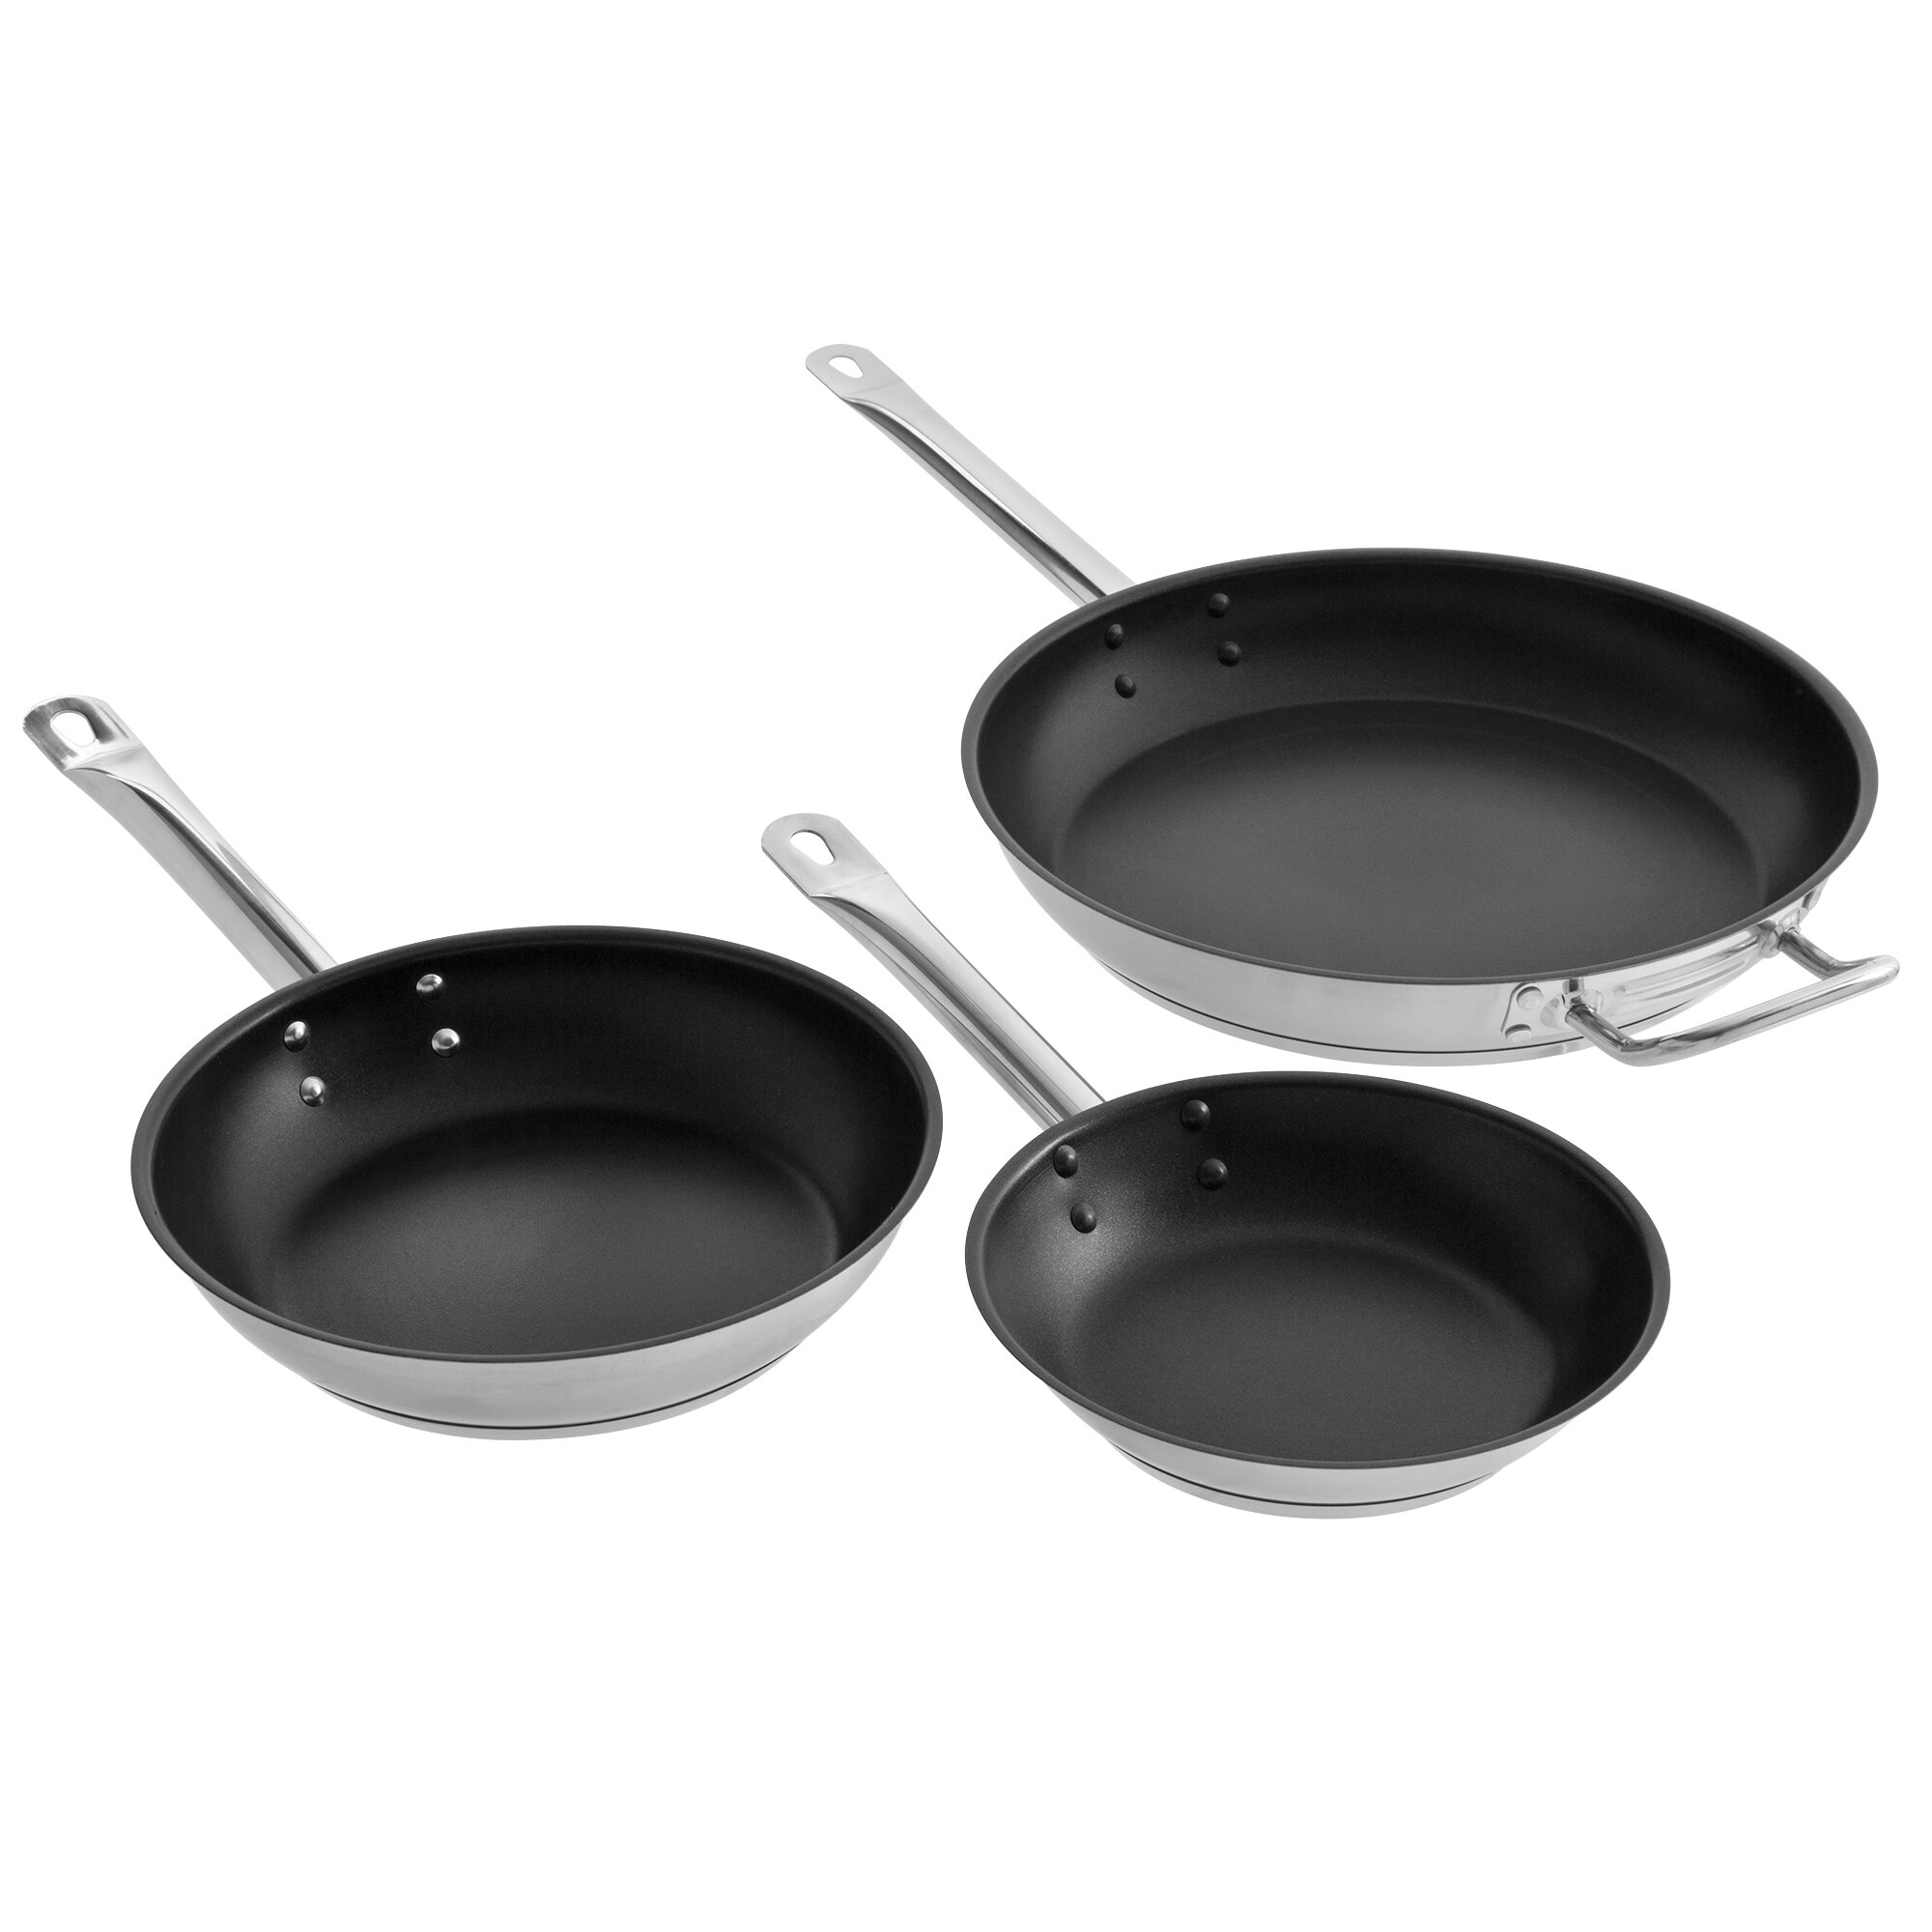 Vigor 3 Piece Stainless Steel Non Stick Fry Pan Set With Aluminum Clad